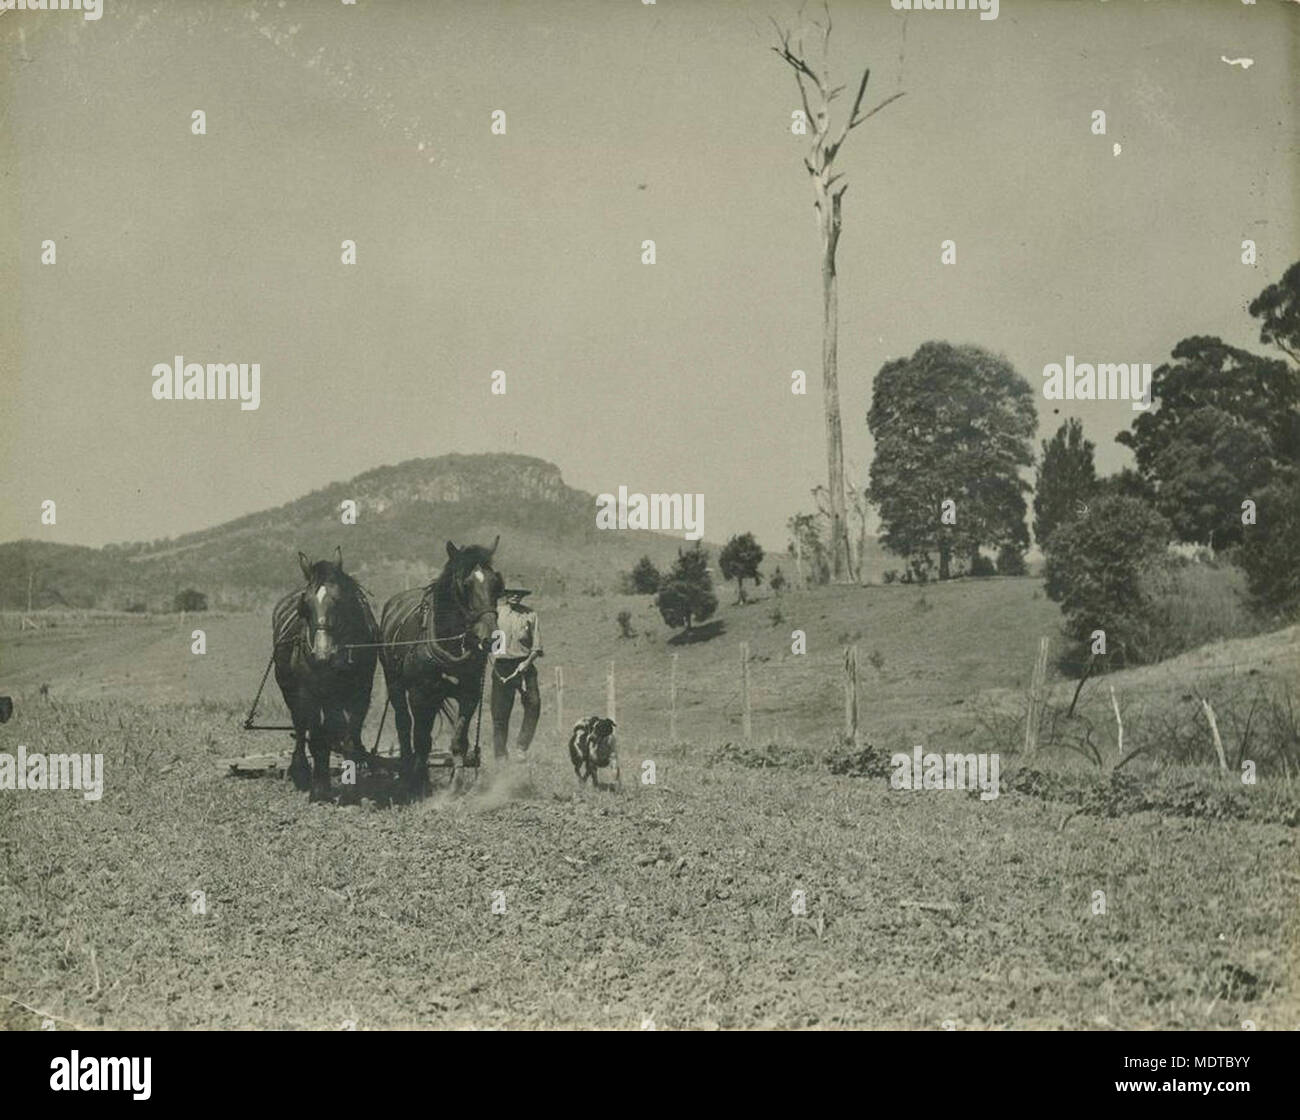 Peaceful rural scene in South East Queensland. Location:  Near Mt. Ninderry, Queensland, Australia  Date:  Undated. Circa 1940  Description:  Farmer with his horse team ploughing a paddock. His dog is keeping him company. Stock Photo